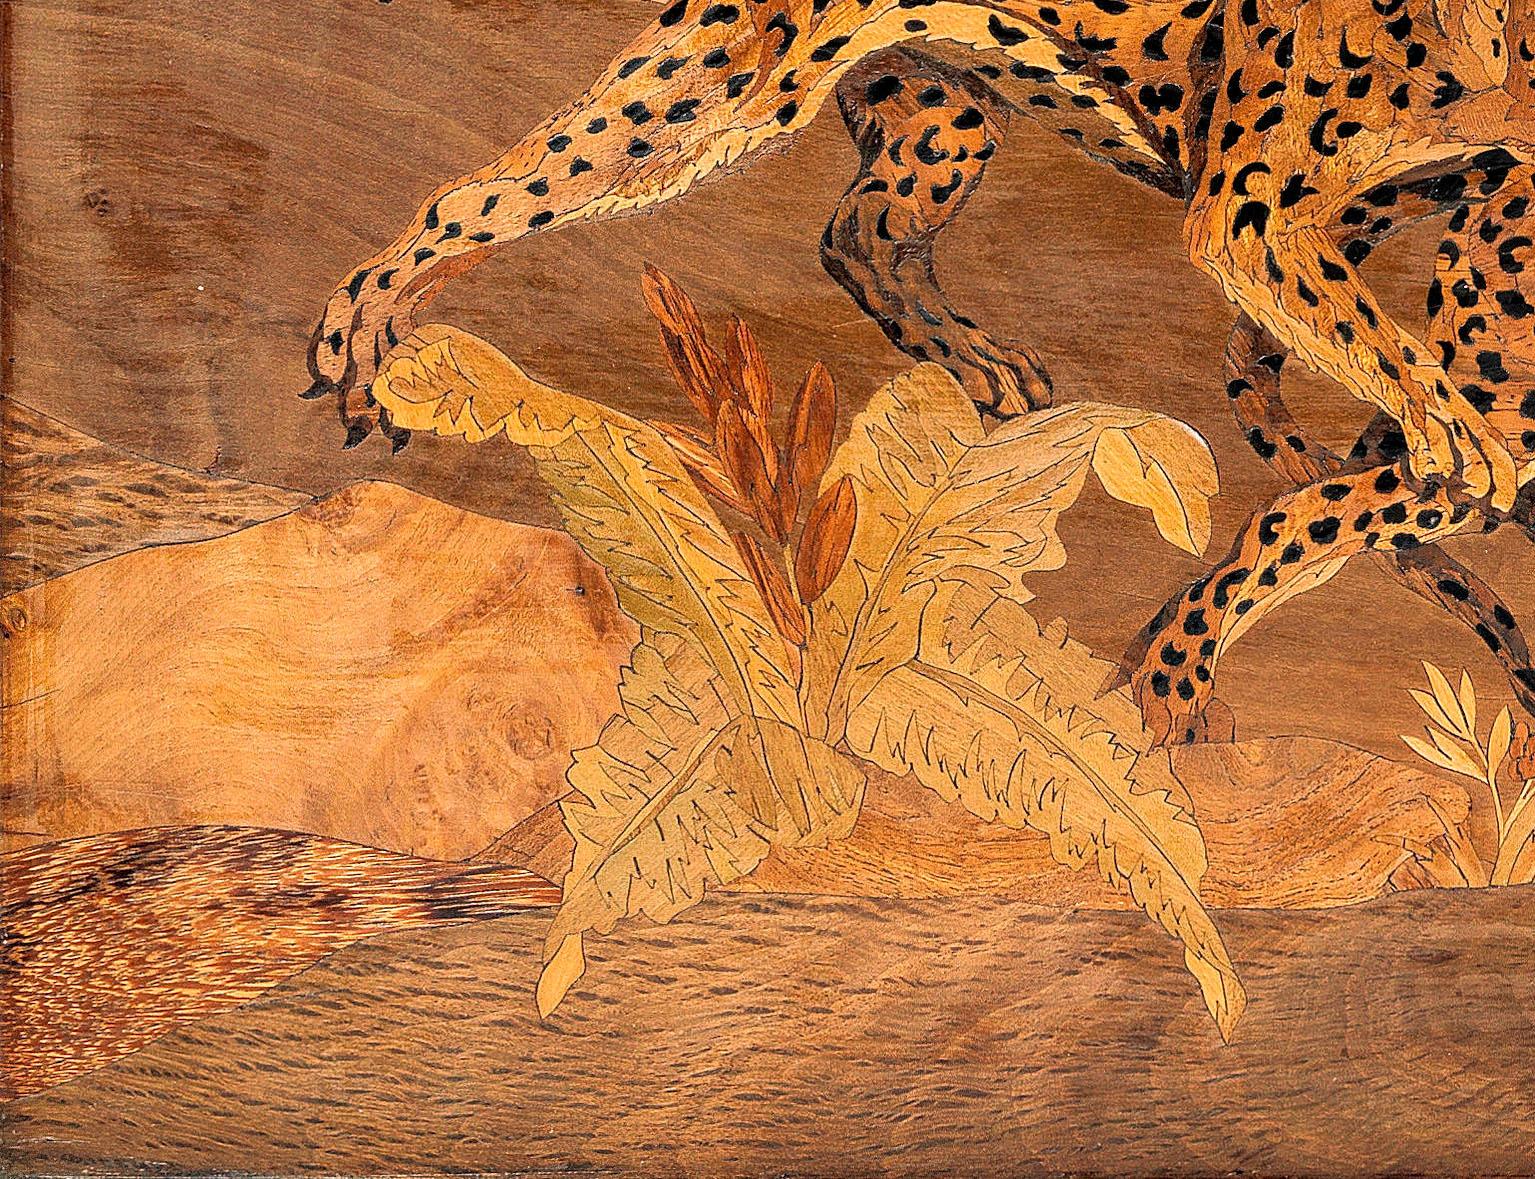 An exceptional marquetry panel by Georges Lucien Guyot, derived from his explorations and observations in the wilds of Africa. This rare marquetry panel depicts two Cheetahs fighting in a verdant landscape, picked out in exotic timbers including